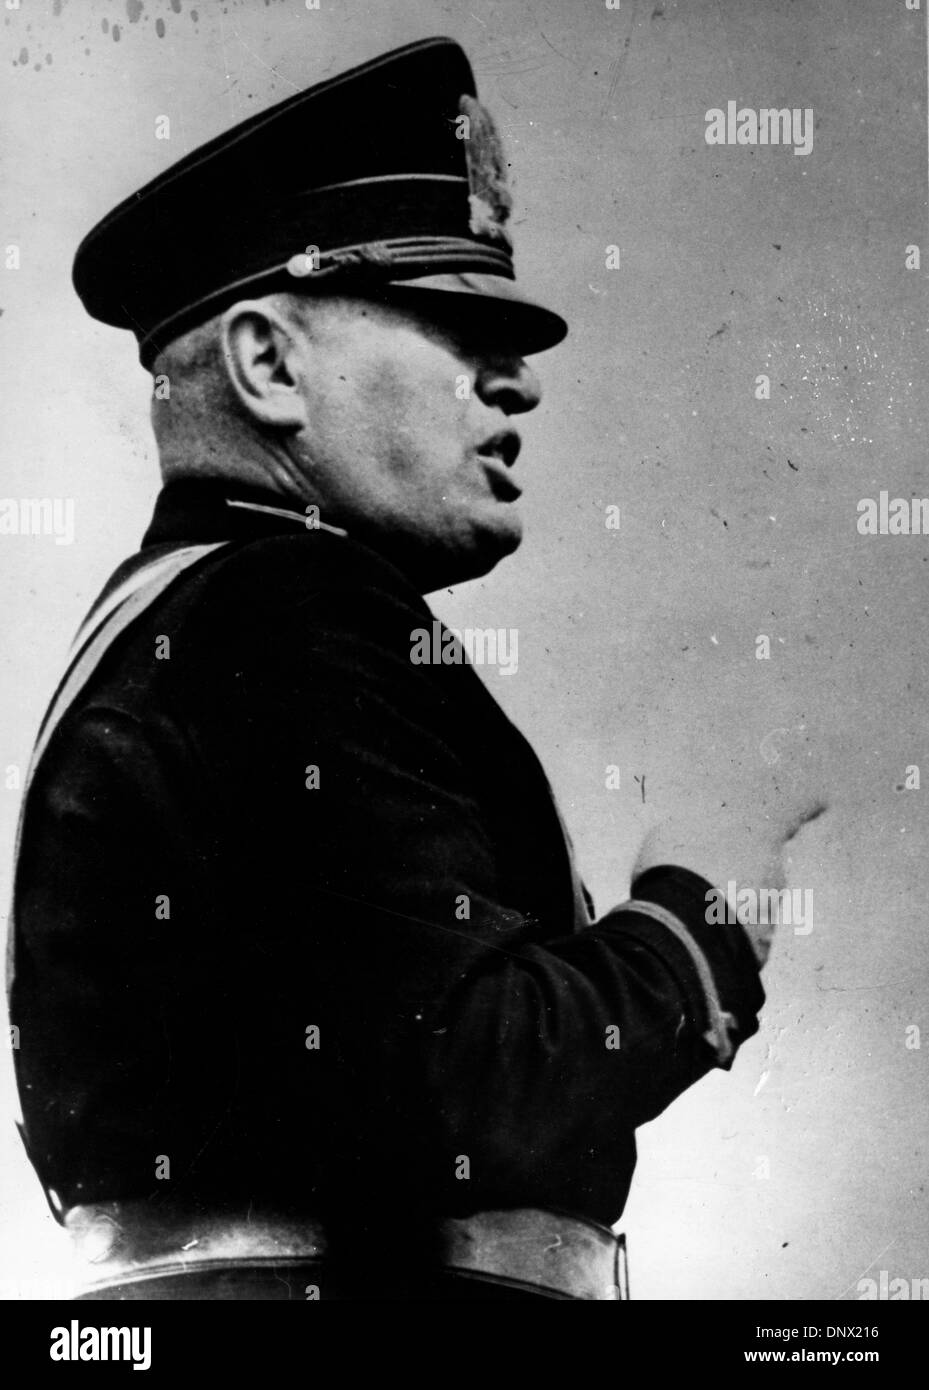 June 15, 1938 - Rome, Italy - BENITO MUSSOLINI (1883-1945) the Italian dictator and leader of the Fascist movement. (Credit Image: © KEYSTONE Pictures USA/ZUMAPRESS.com) Stock Photo